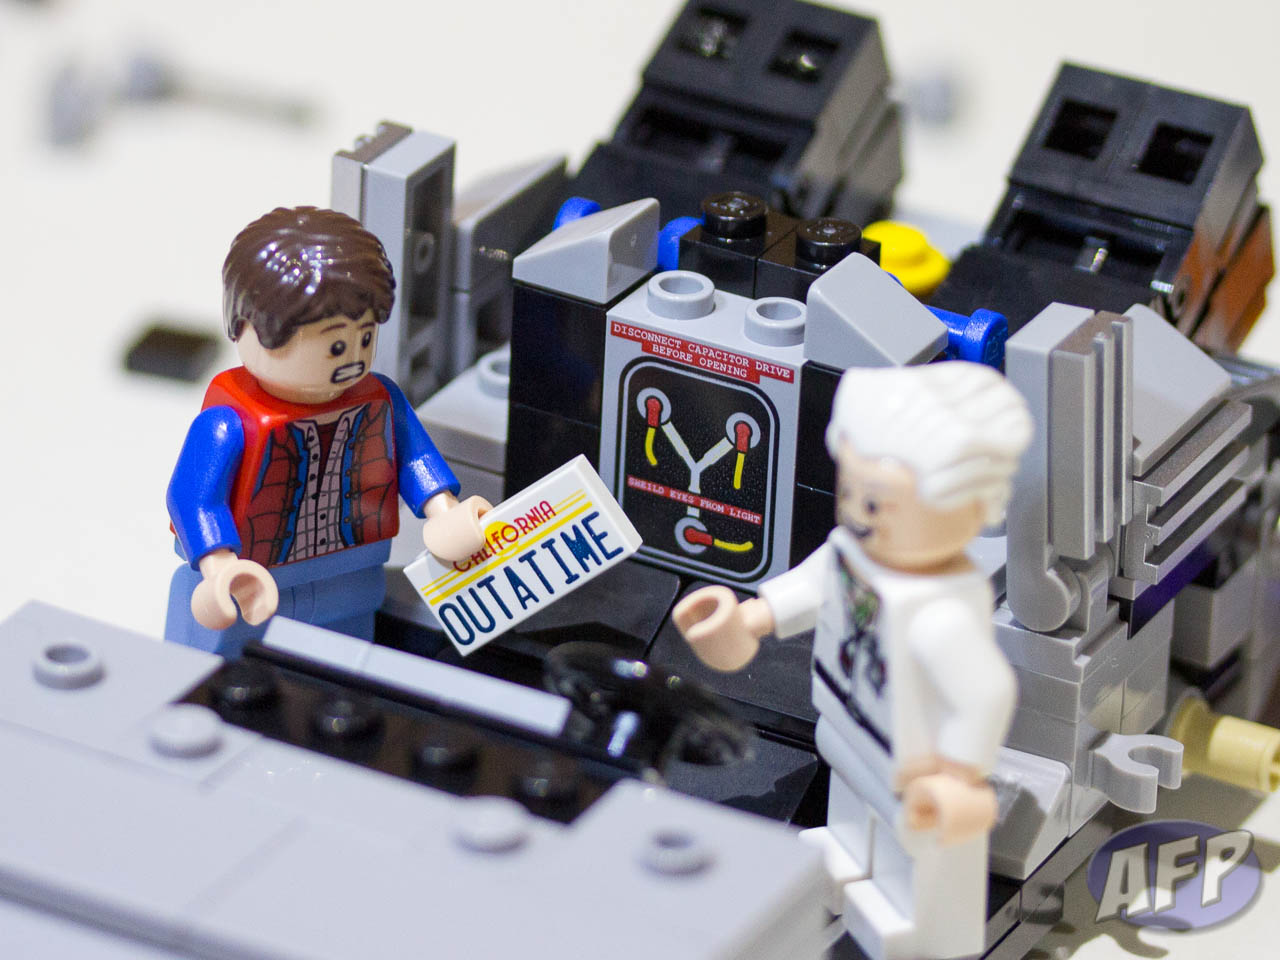 Lego DeLorean from Back to the Future revealed - Drive